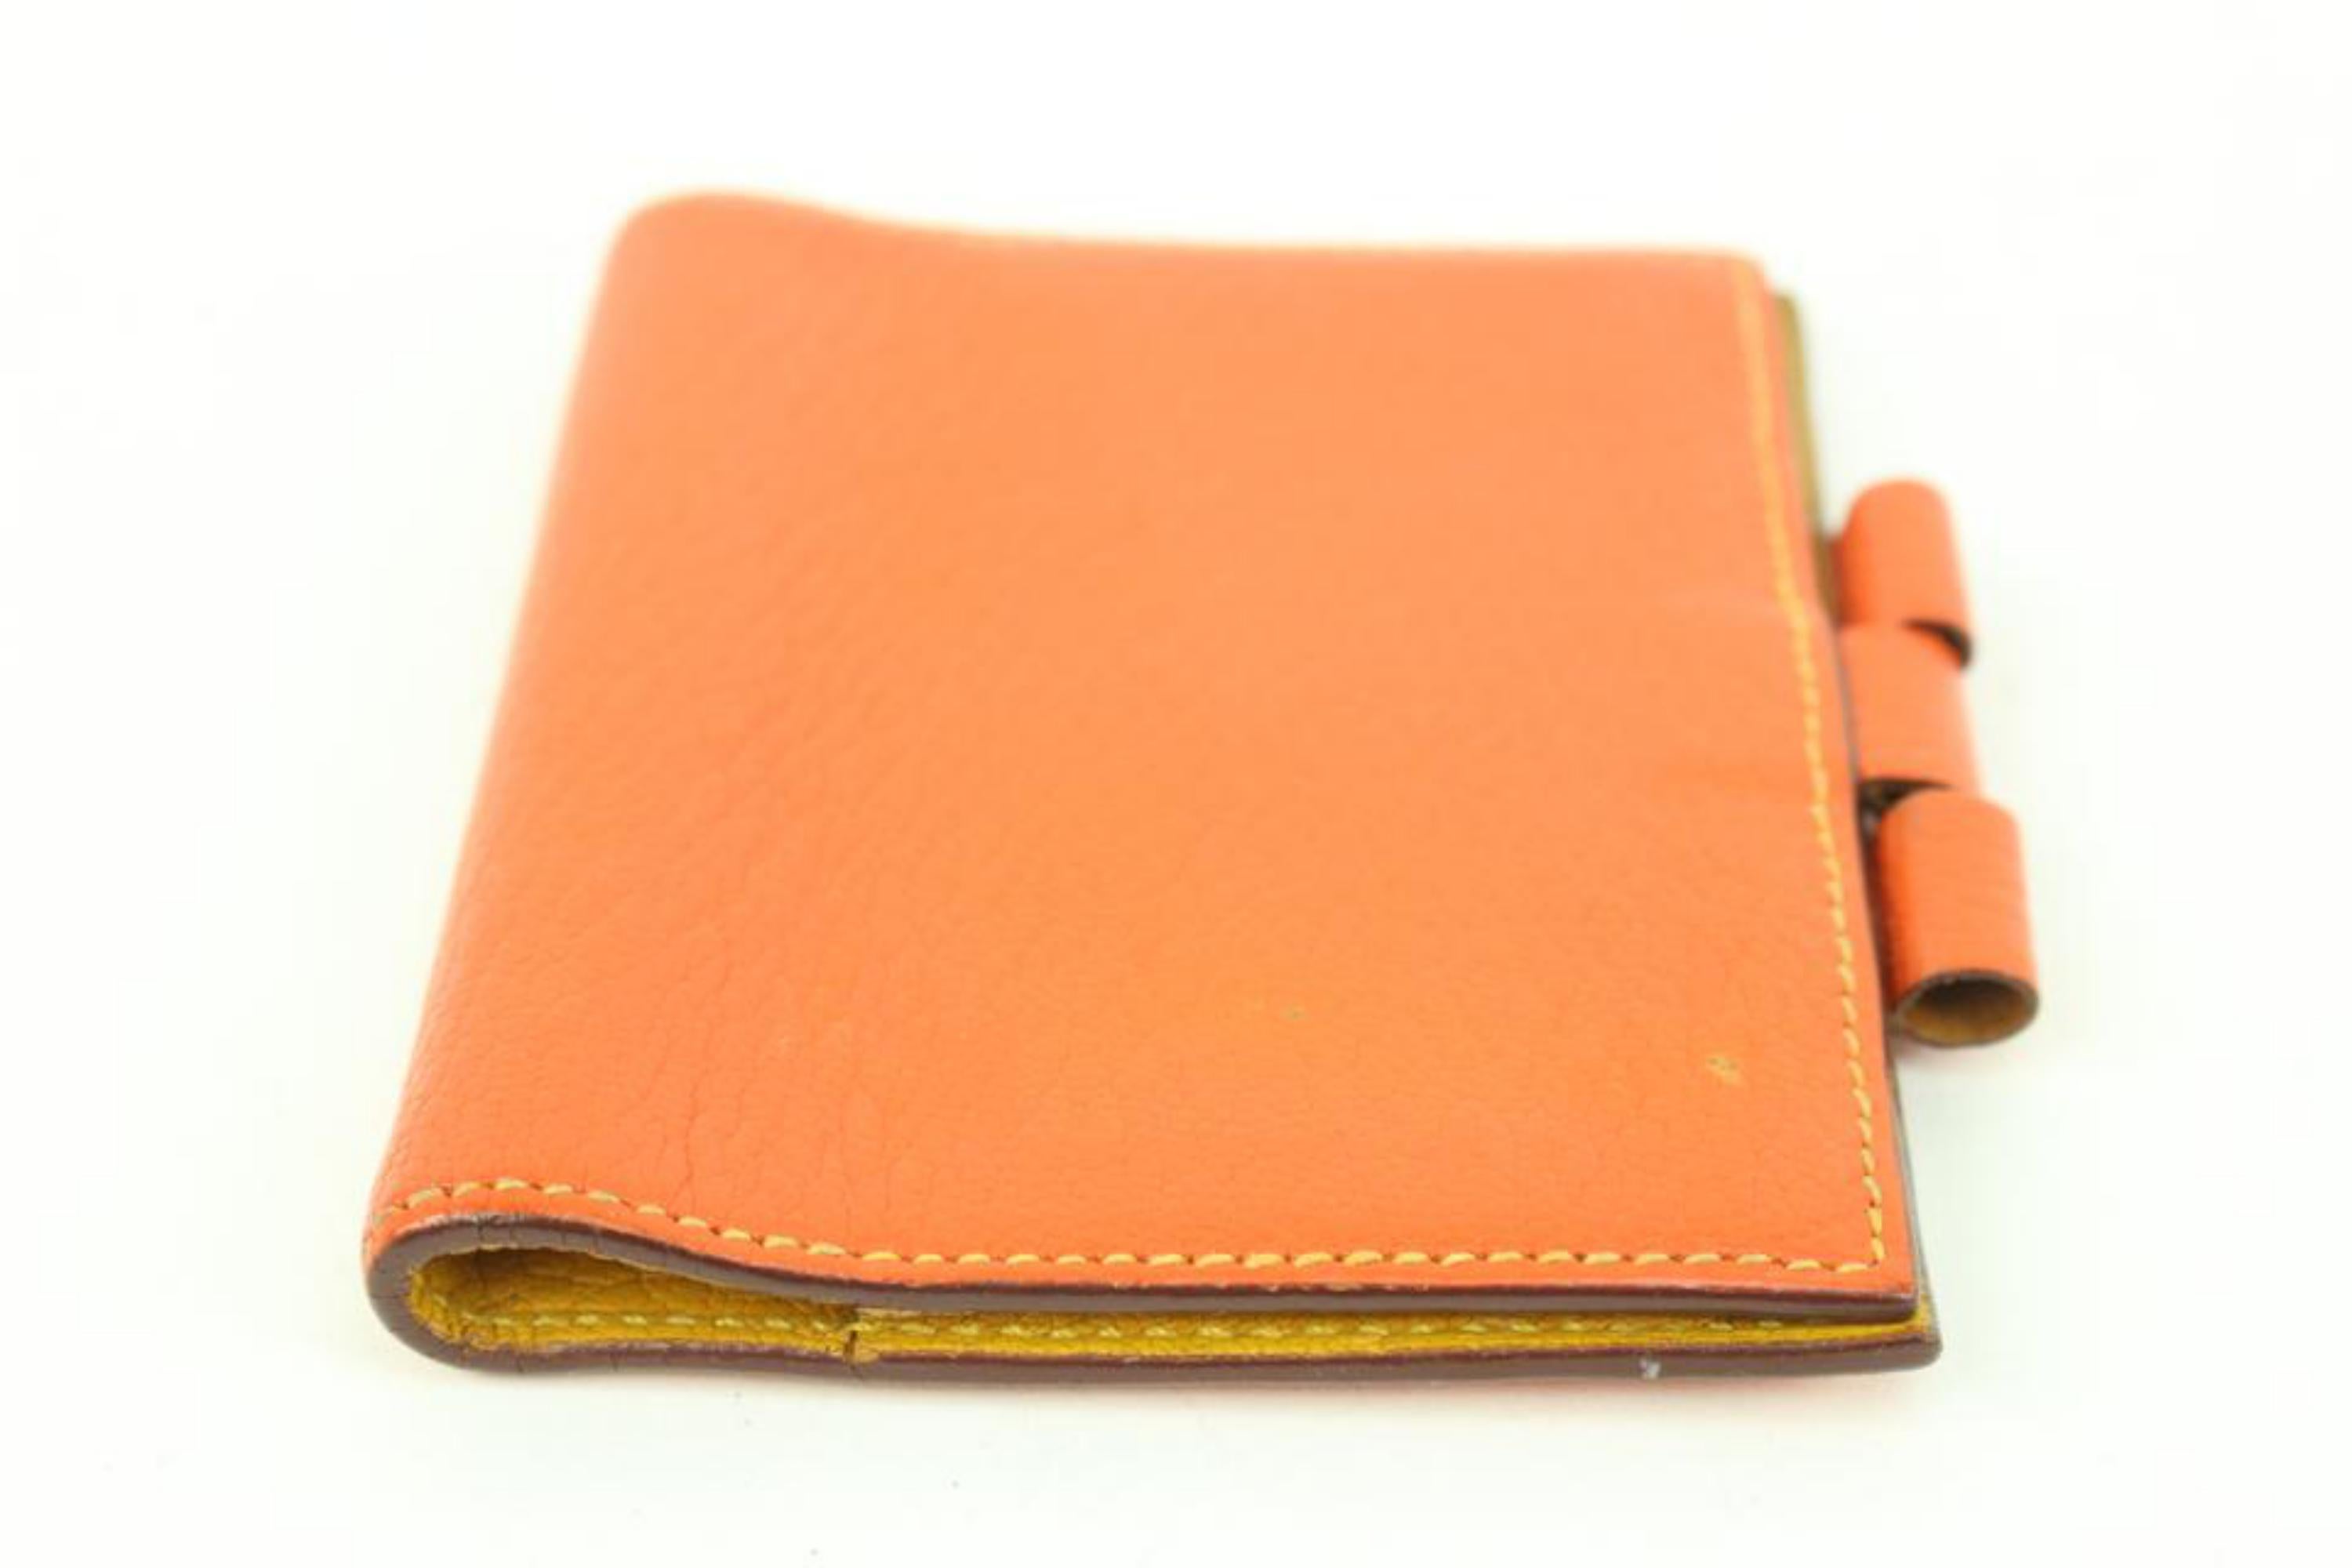 Hermès Orange Leather Globe Trotter Agenda Cover PM 11h426s In Good Condition For Sale In Dix hills, NY